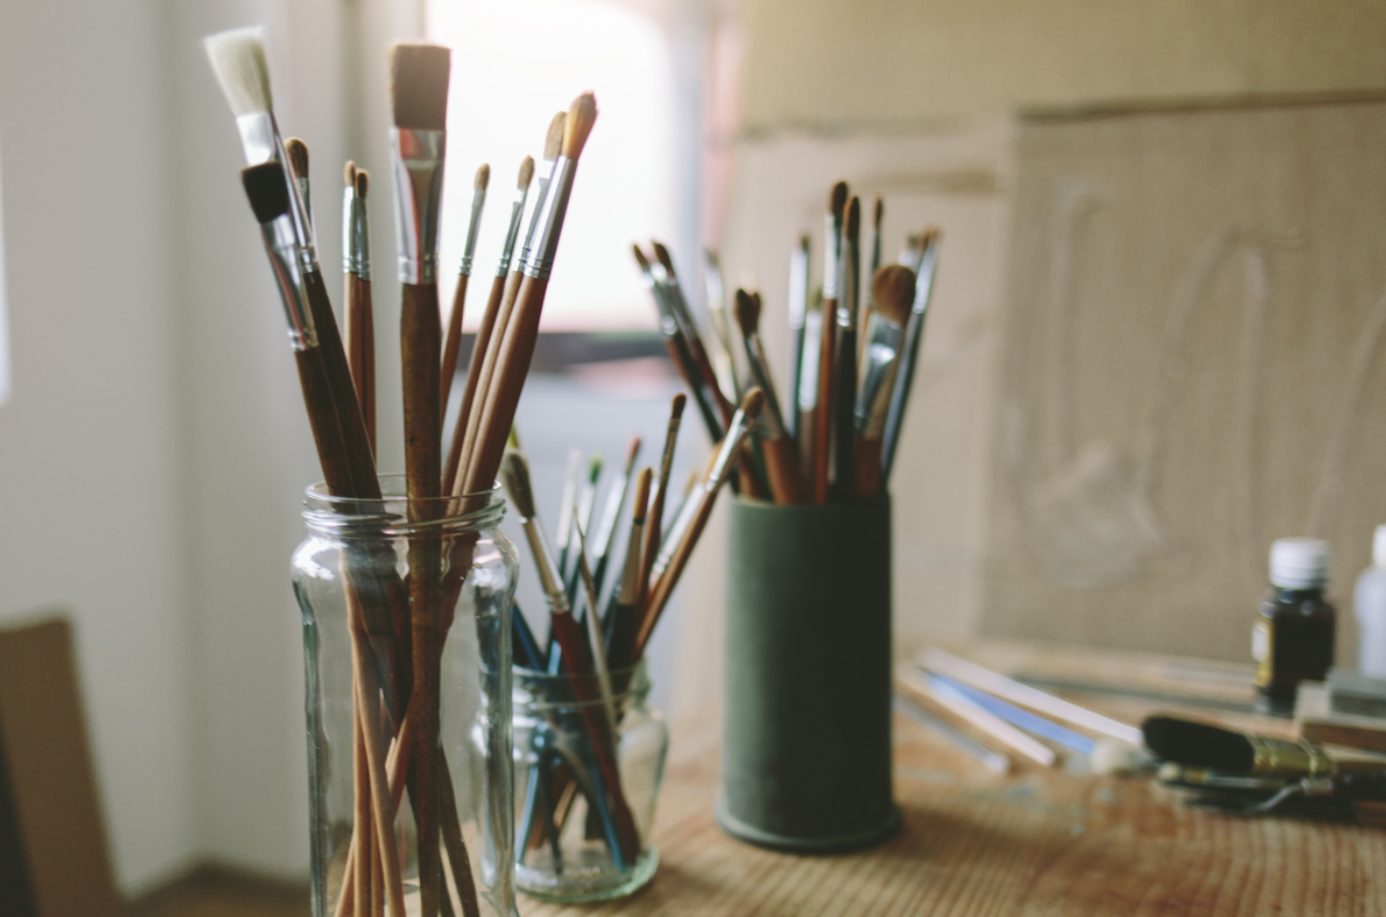 A close-up of paintbrushes and artists' supplies in clear glasses in a studio.